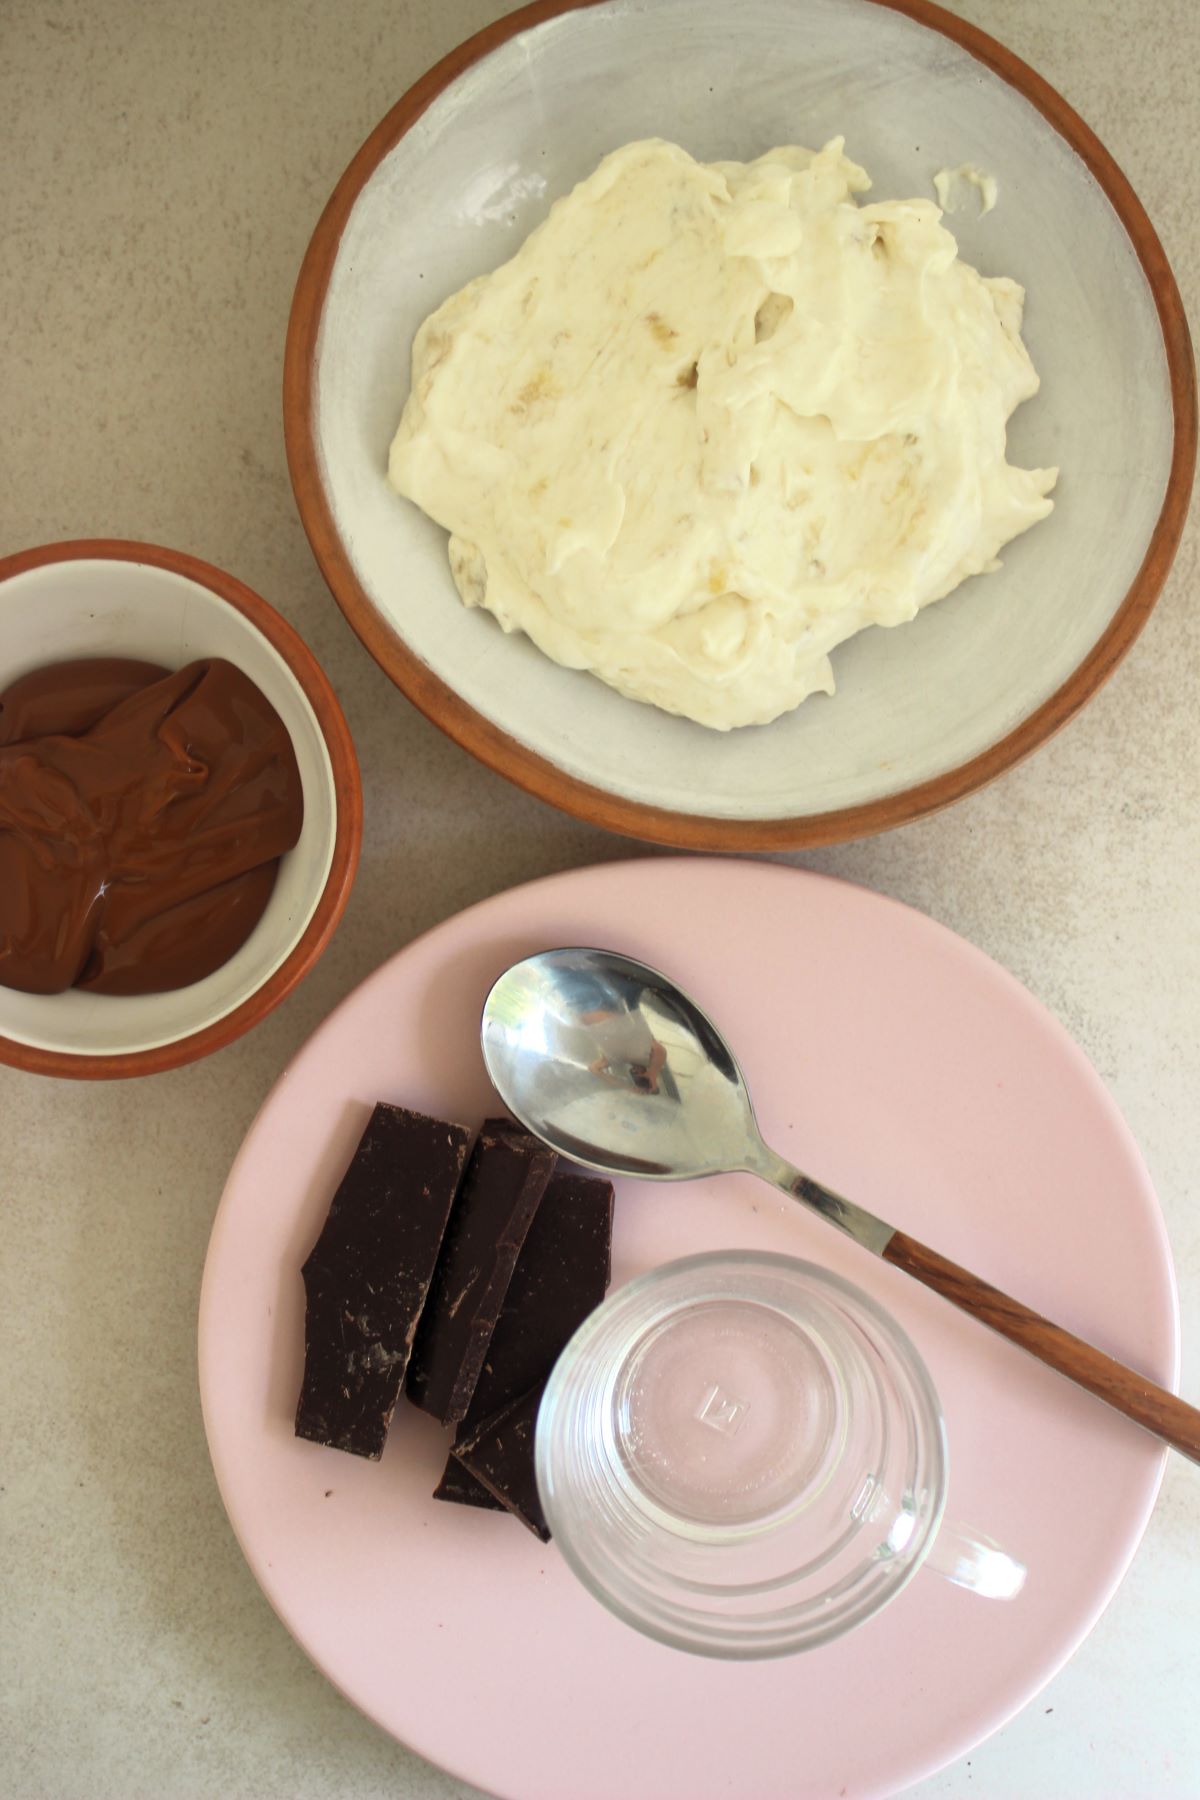 Bowl with dulce de leche, a plate with banana cream, and another plate with chocolate, a glass, and a spoon, seen from above.